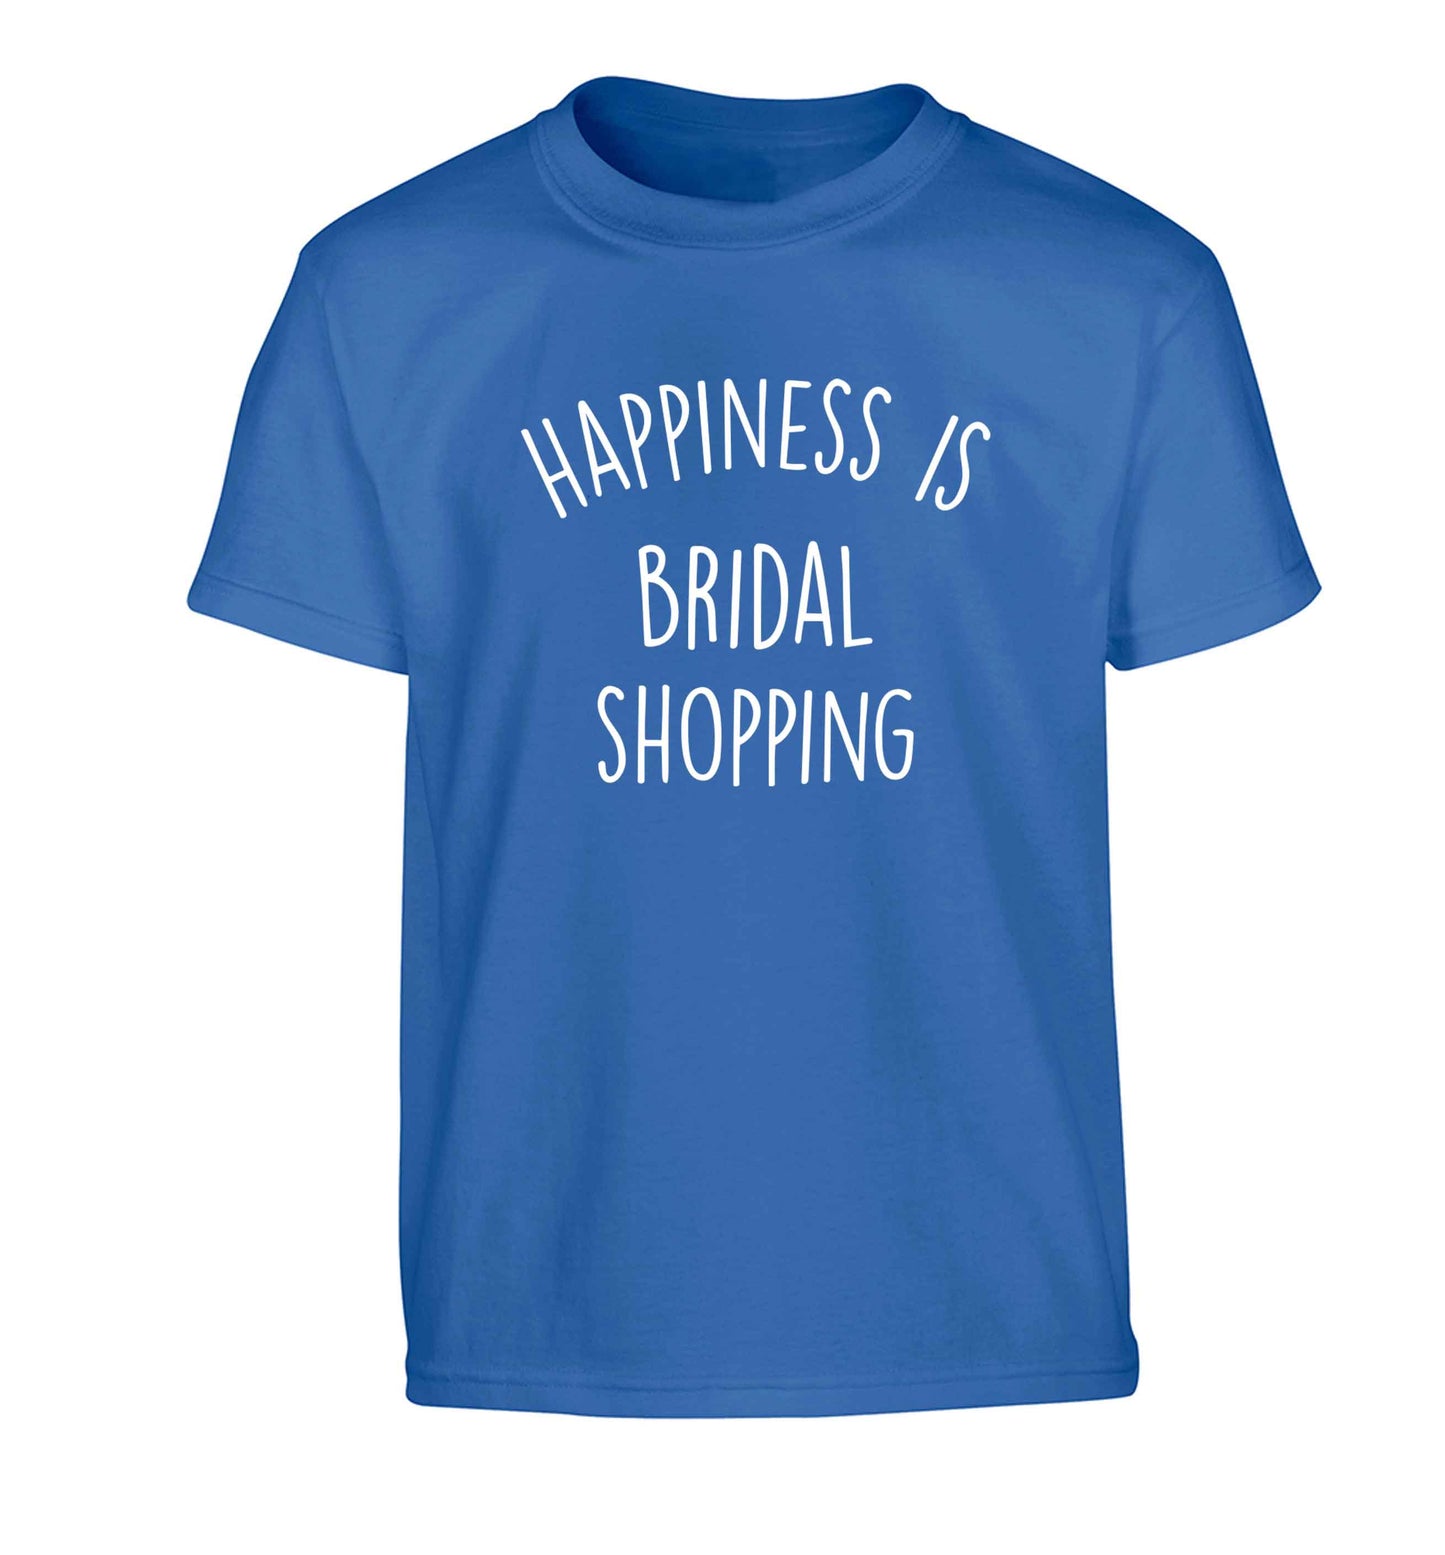 Happiness is bridal shopping Children's blue Tshirt 12-13 Years